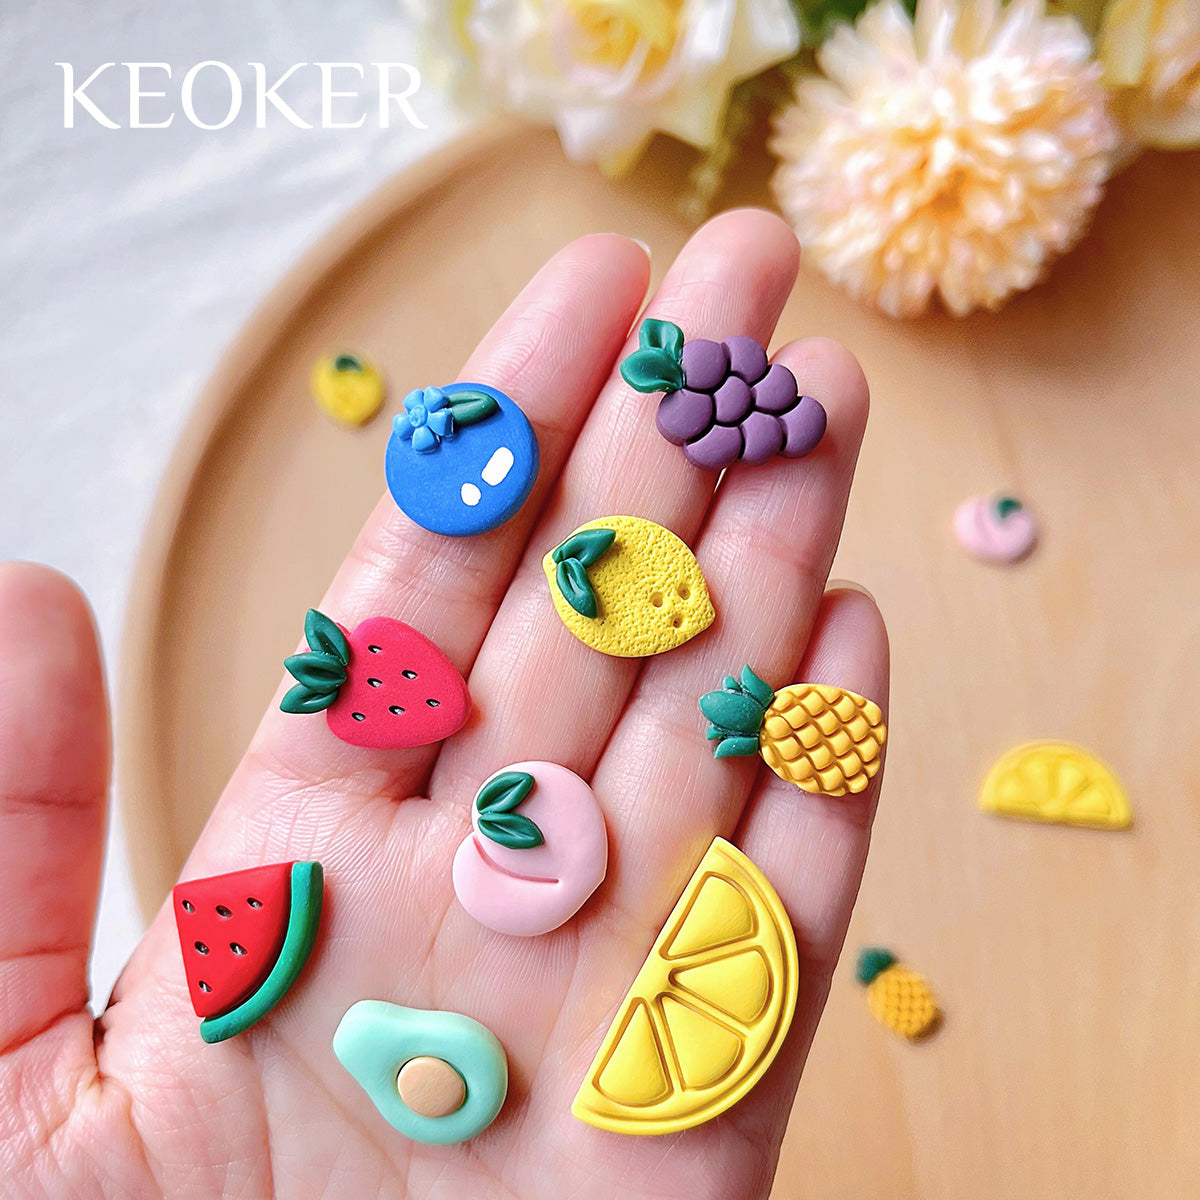 KEOKER Spring Floral Polymer Clay Cutters(12 Shapes)